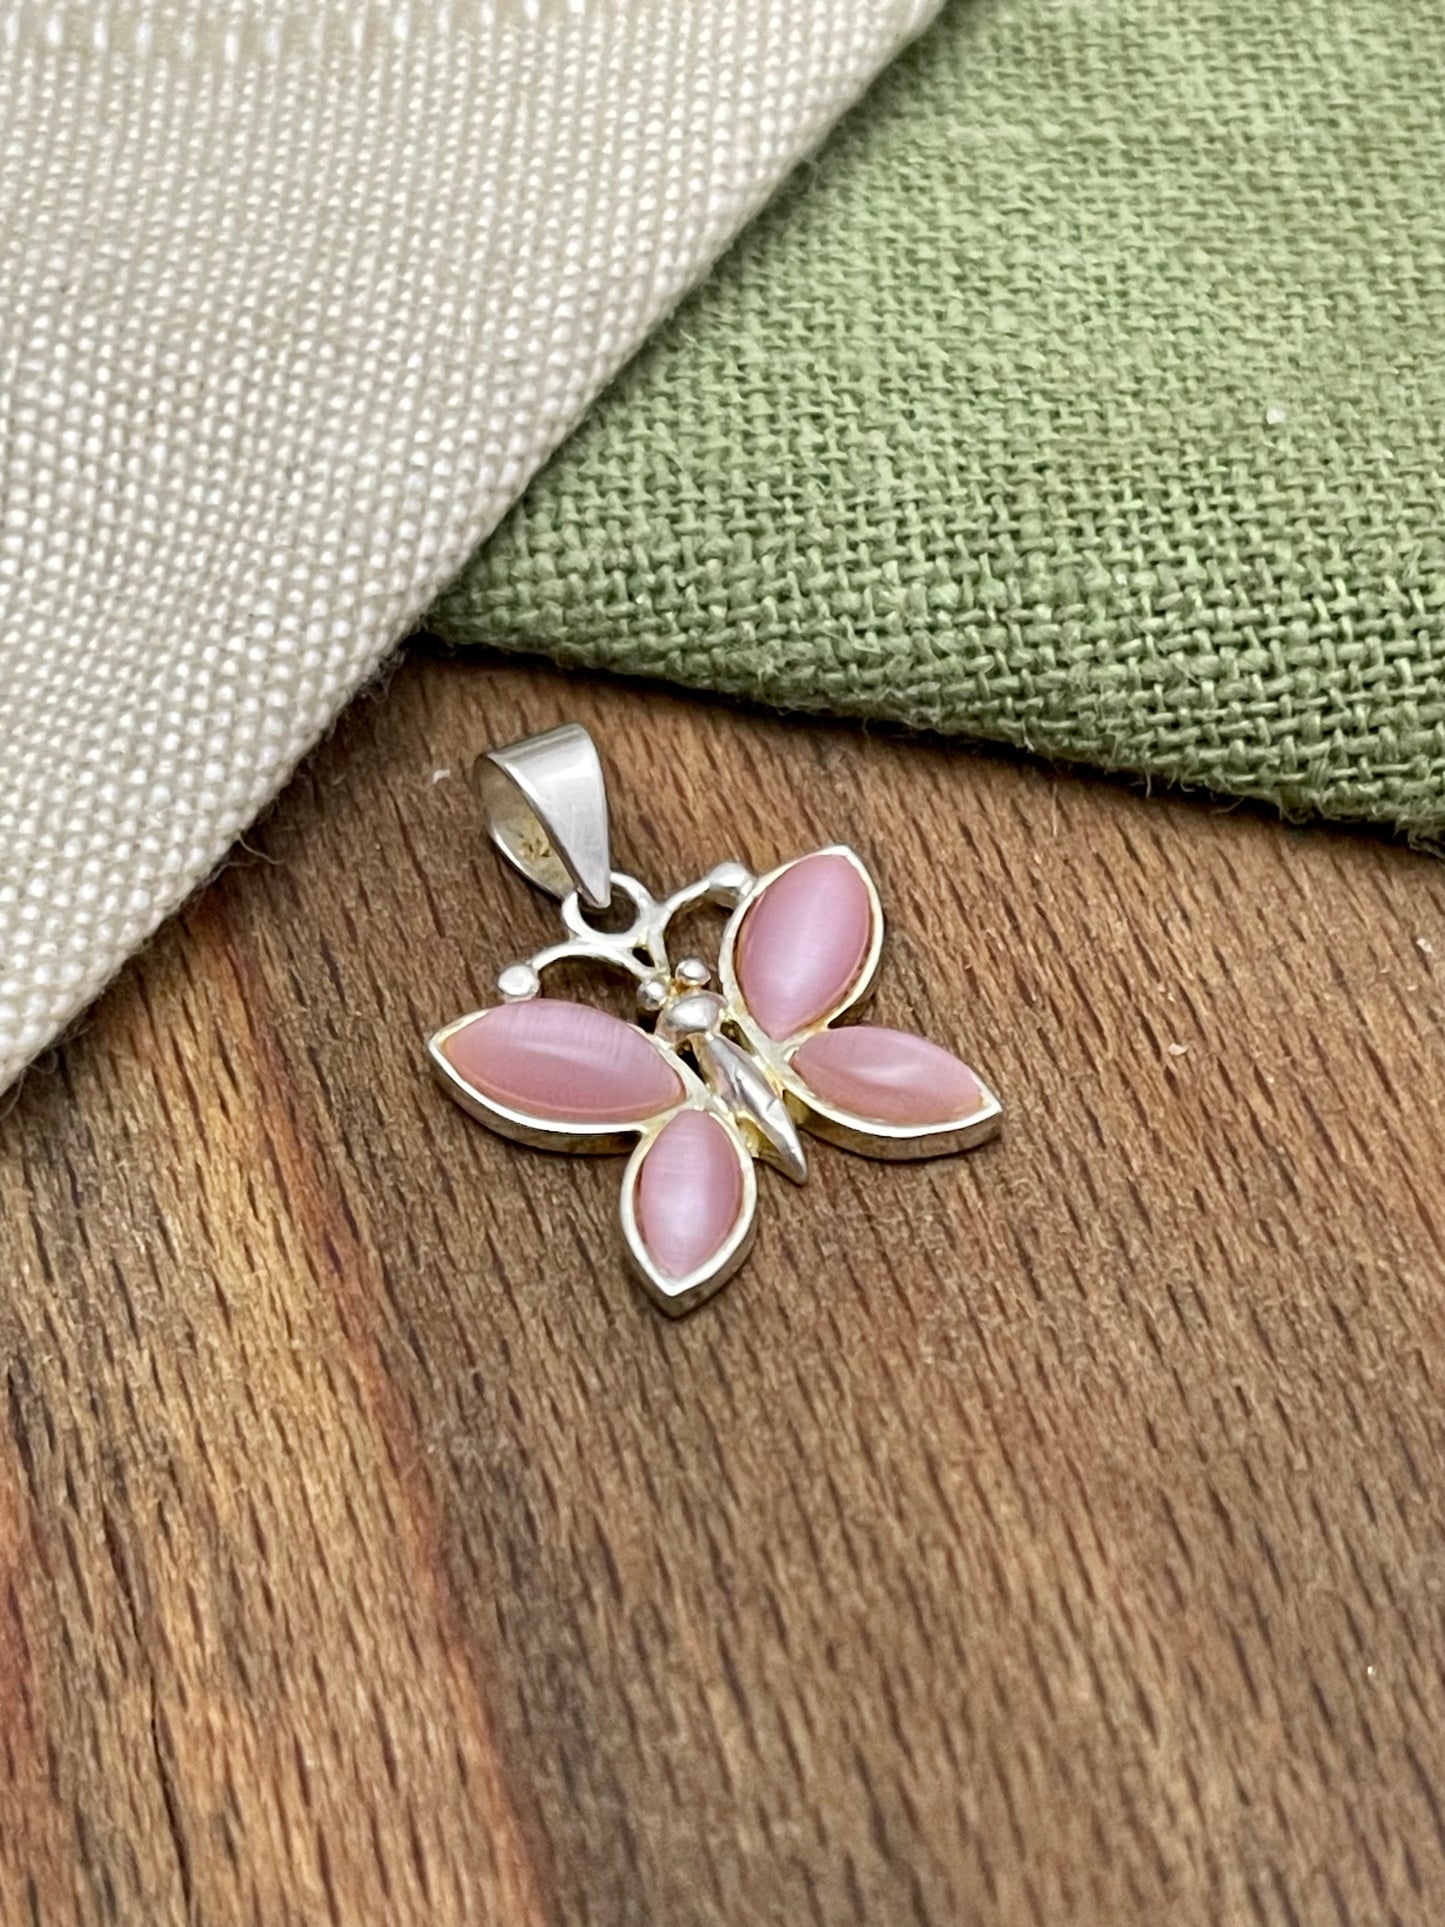 Cute Pink Butterfly Charm Necklace Pendant Sterling 925 Silver Vintage Jewelry